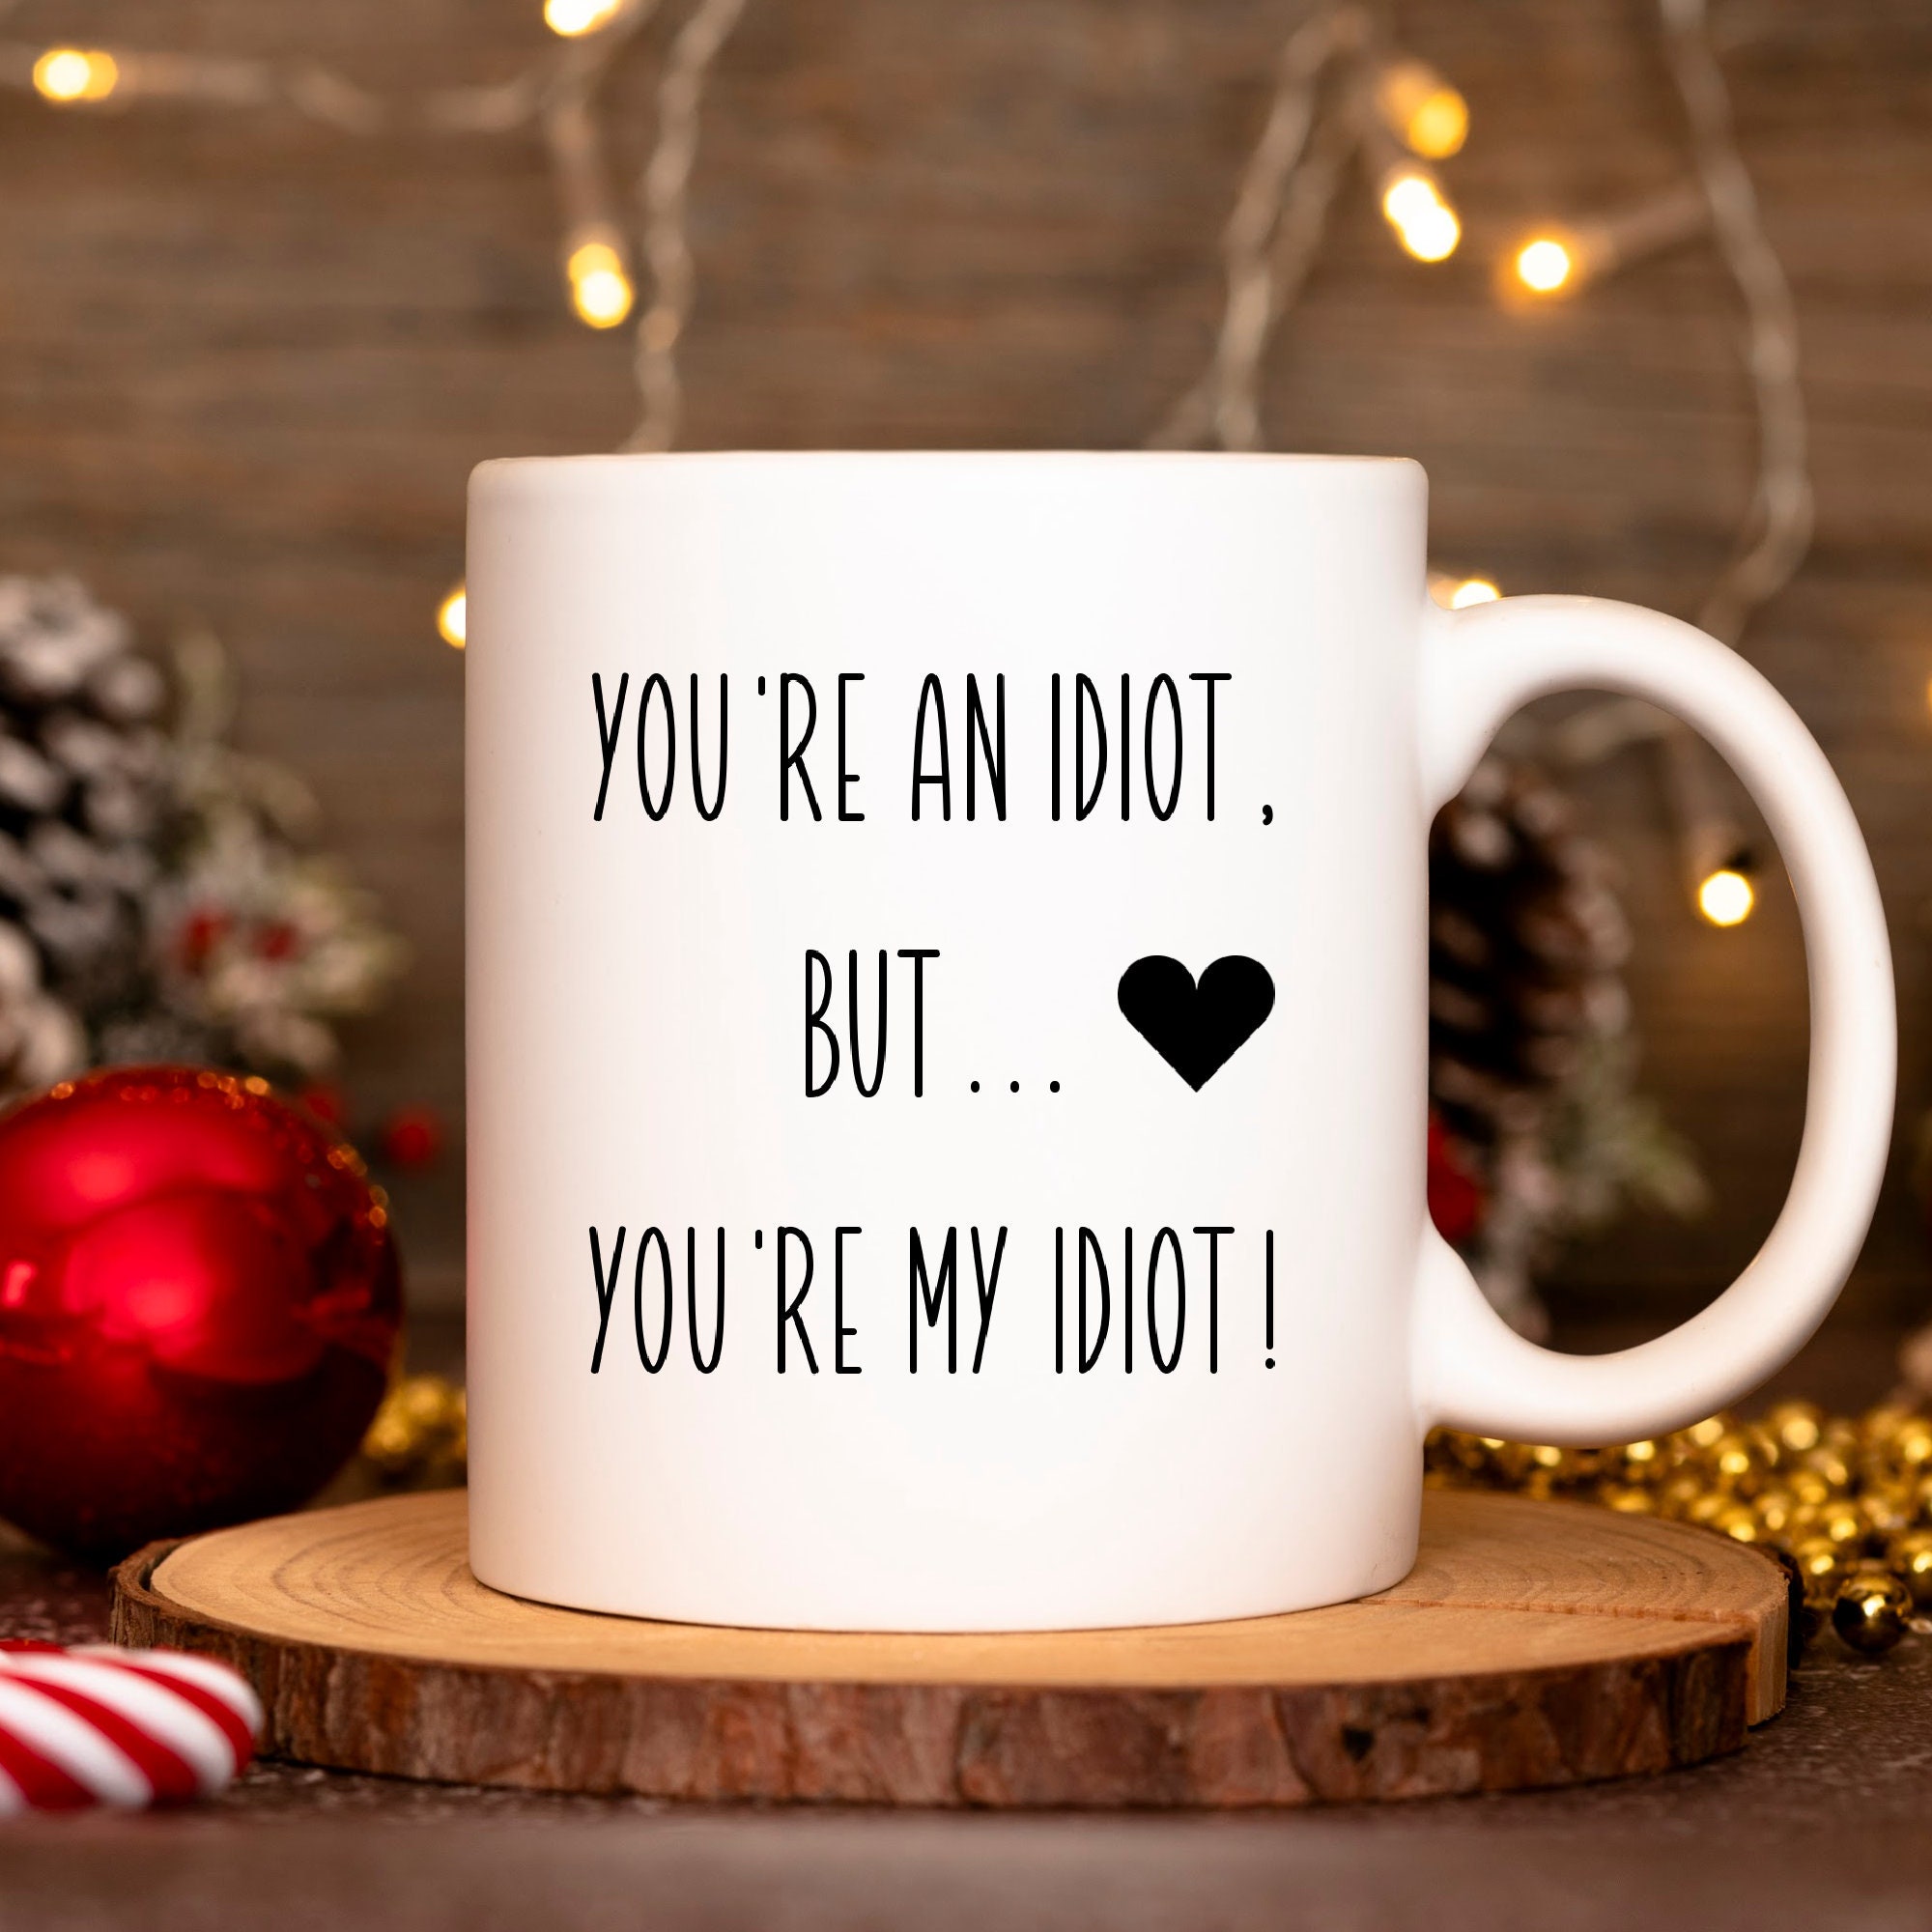 You’re An Idiot But You’re My Idiot Mug – Valentines Day For Him Love Cute Funny Rude Coffee Tea Mugs Cup Gift Present